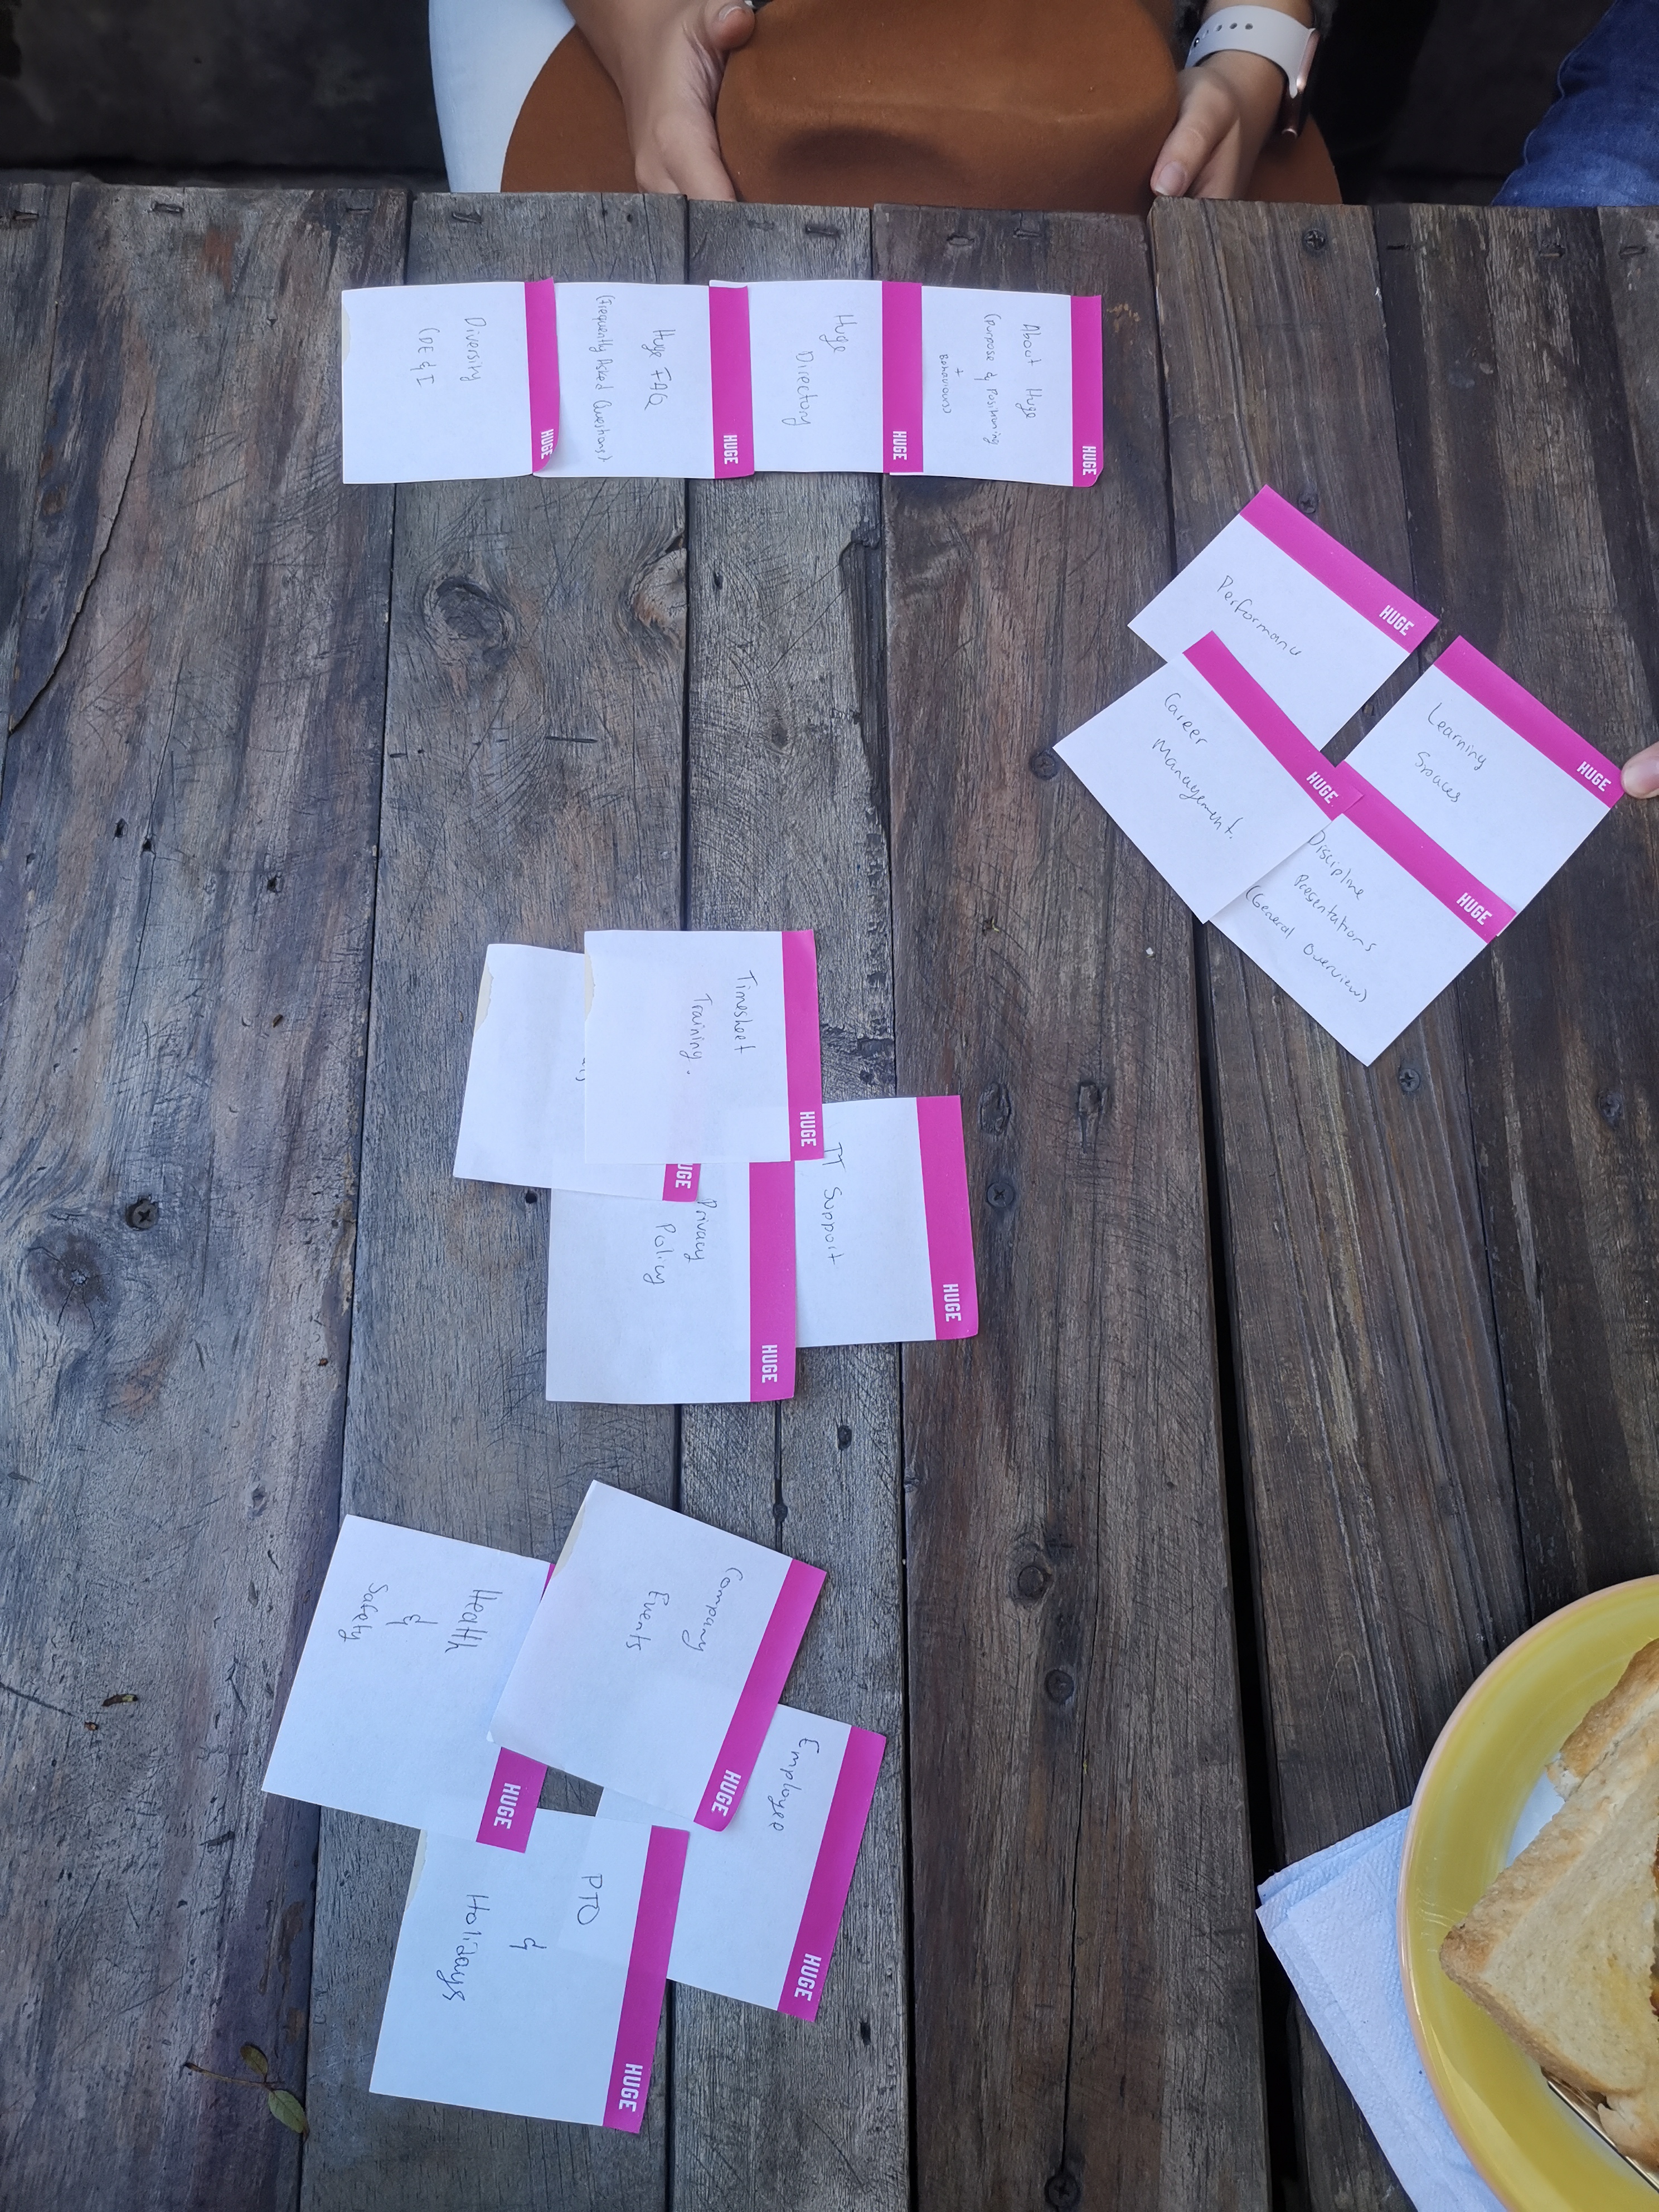 Card sorting results for one group